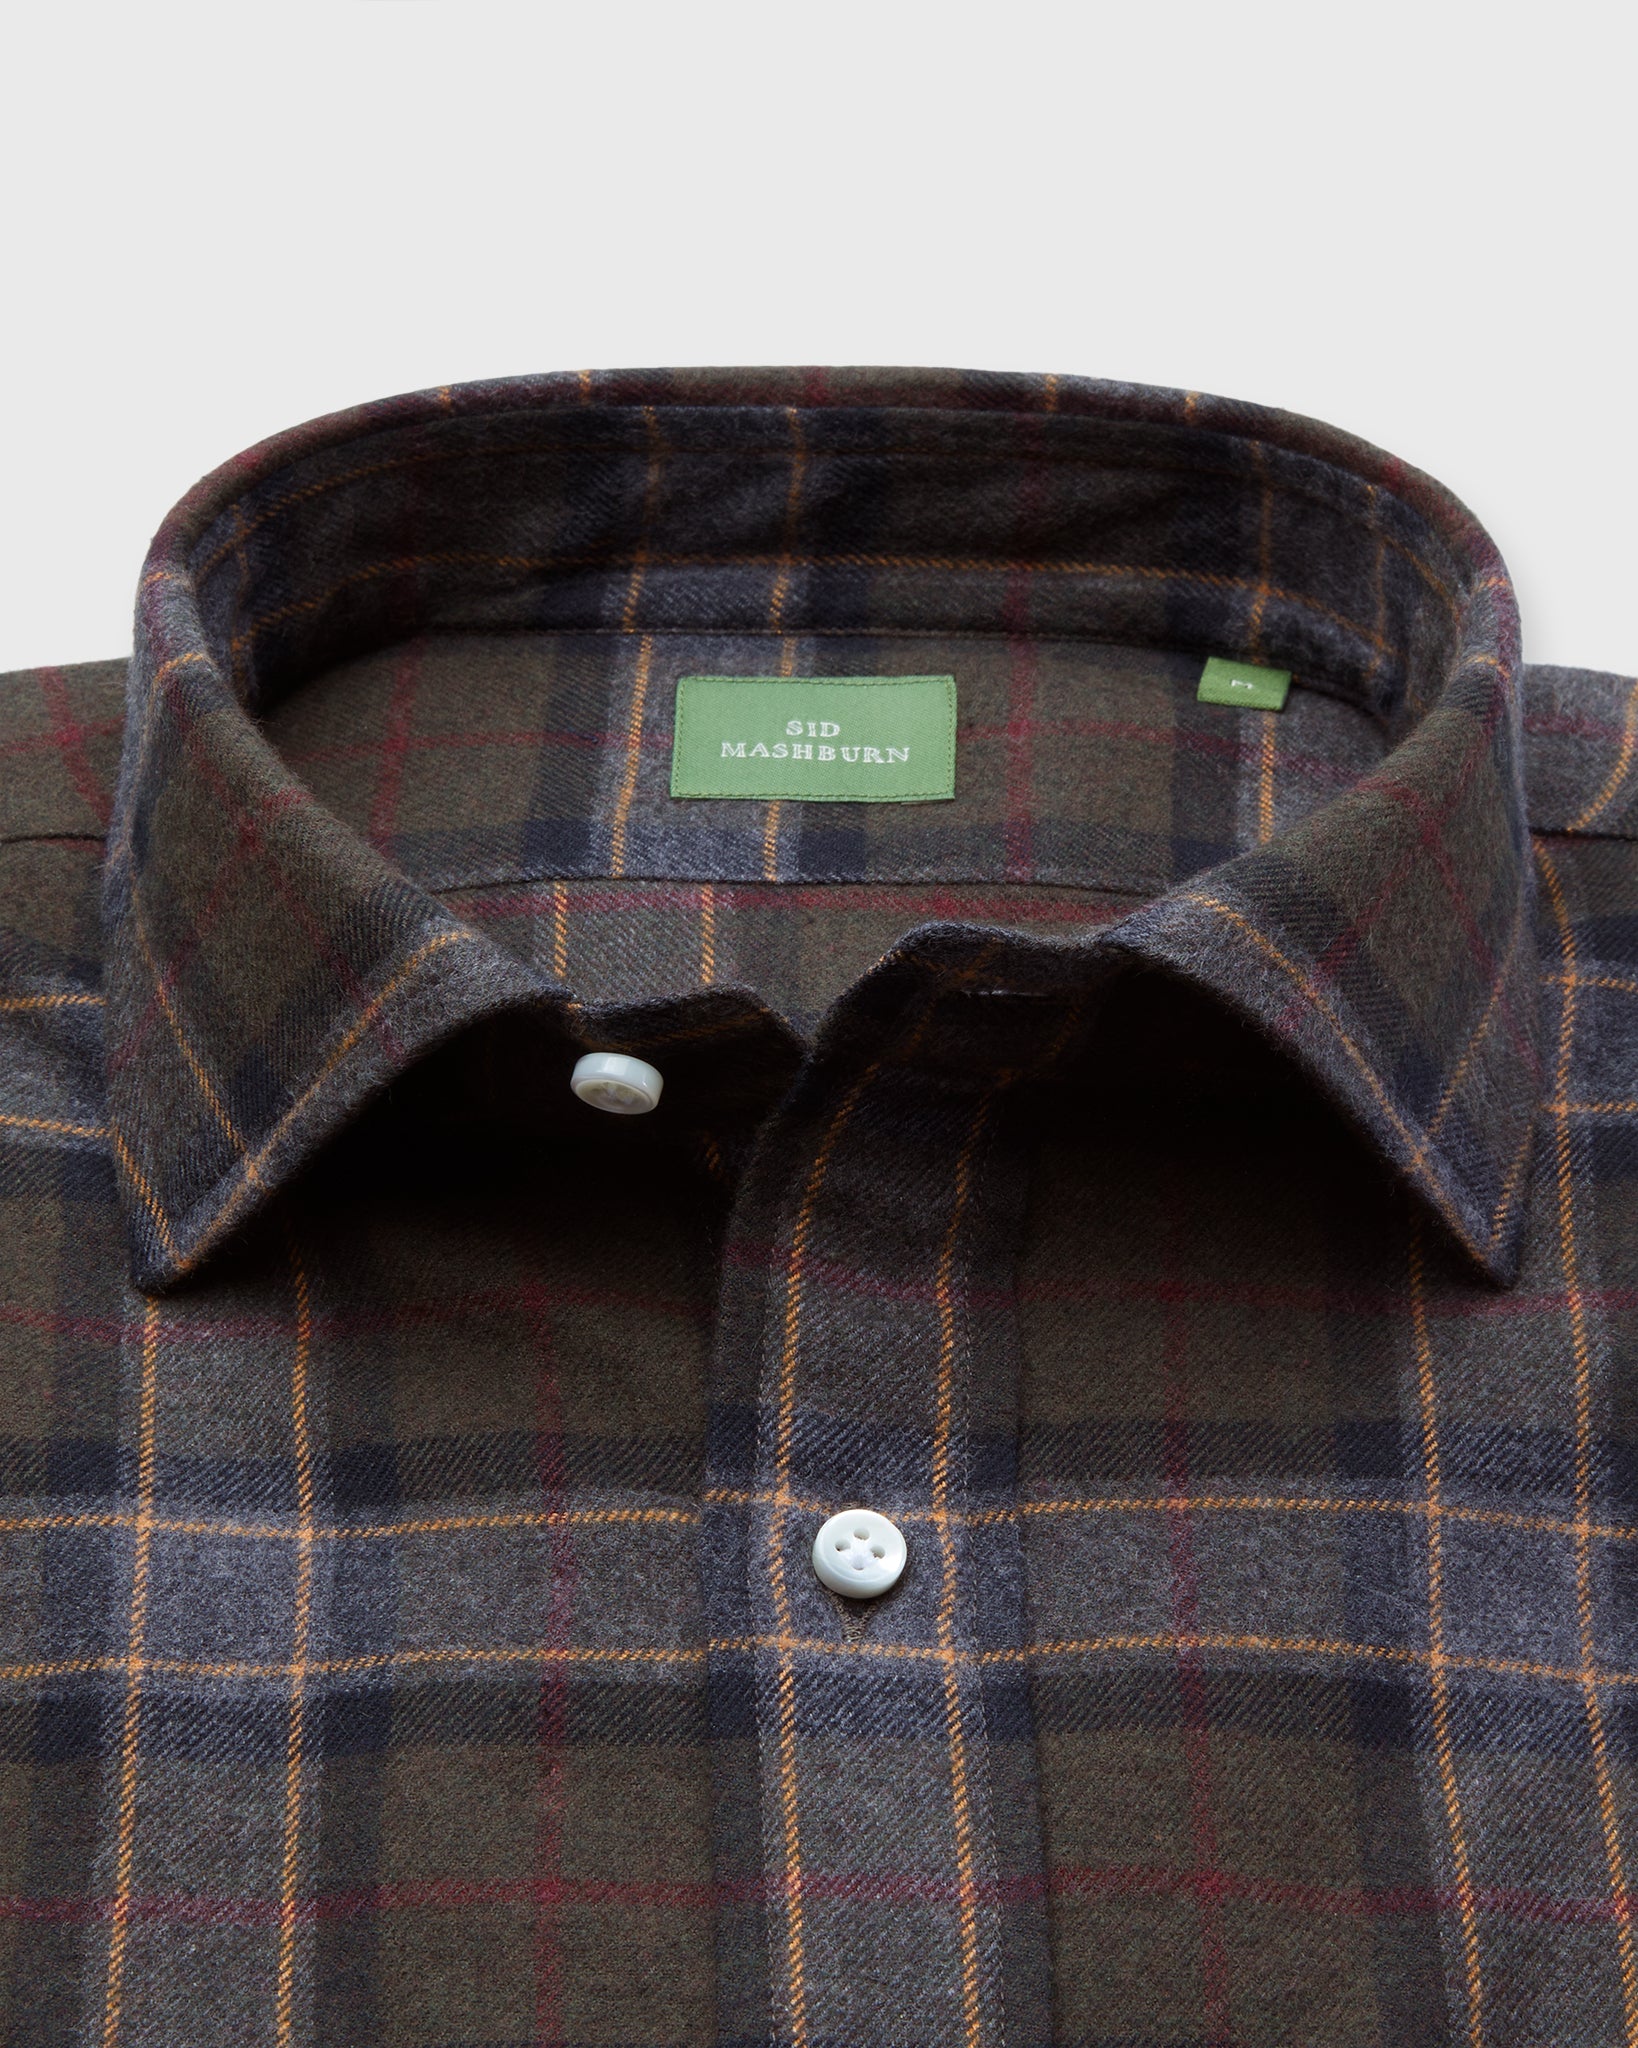 Spread Collar Sport Shirt in Olive/Berry/Scotch Plaid Flannel